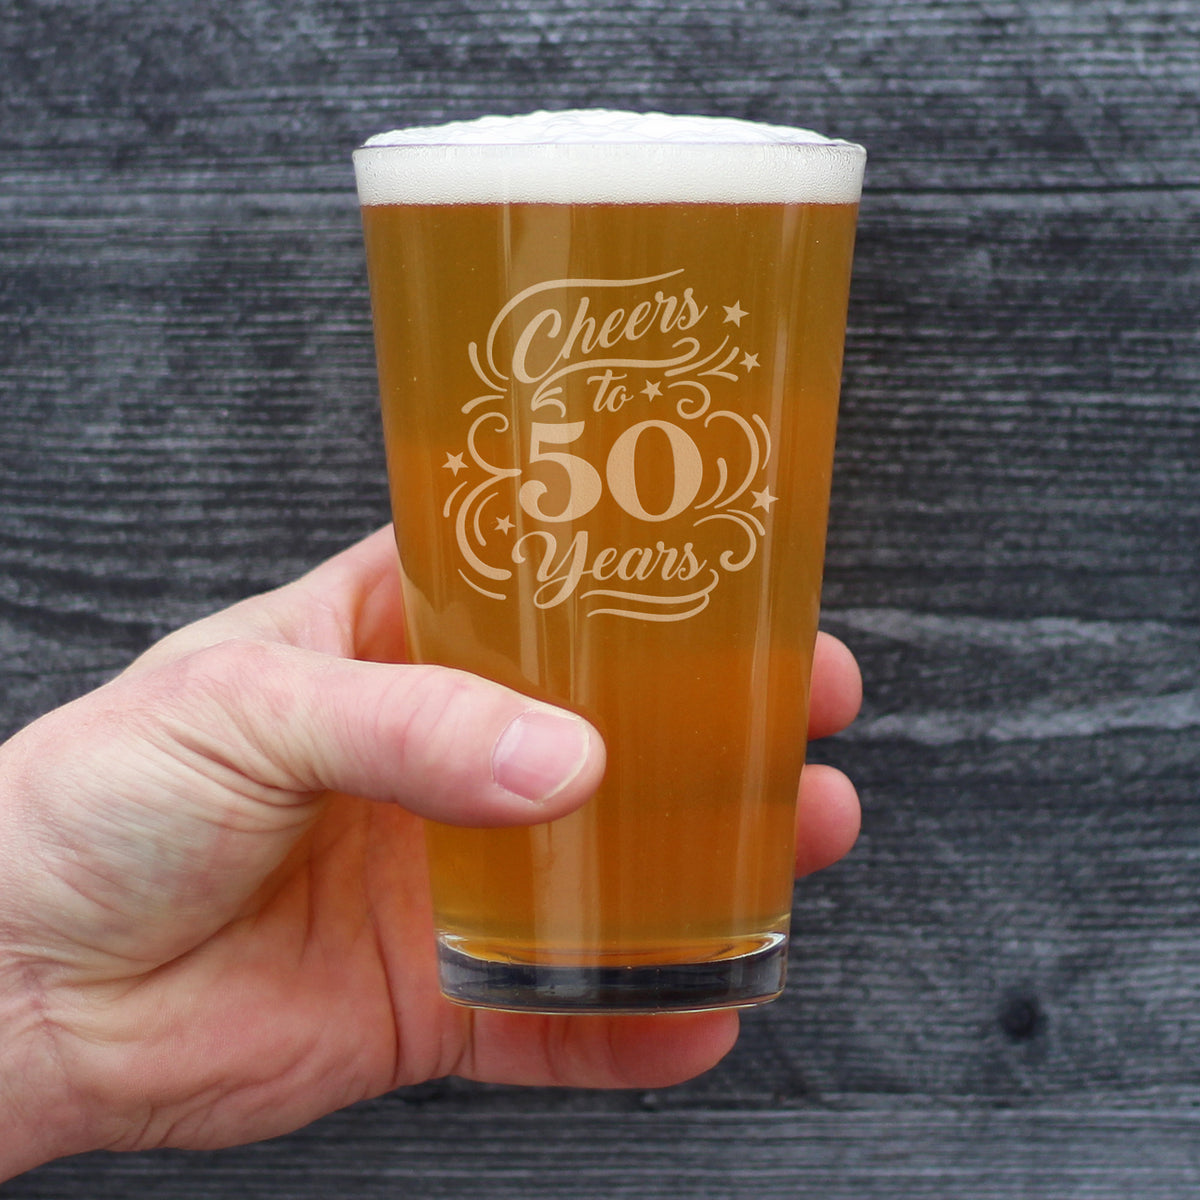 Cheers to 50 Years - Pint Glass for Beer - Gifts for Women &amp; Men - 50th Anniversary Party Decor - 16 Oz Glasses